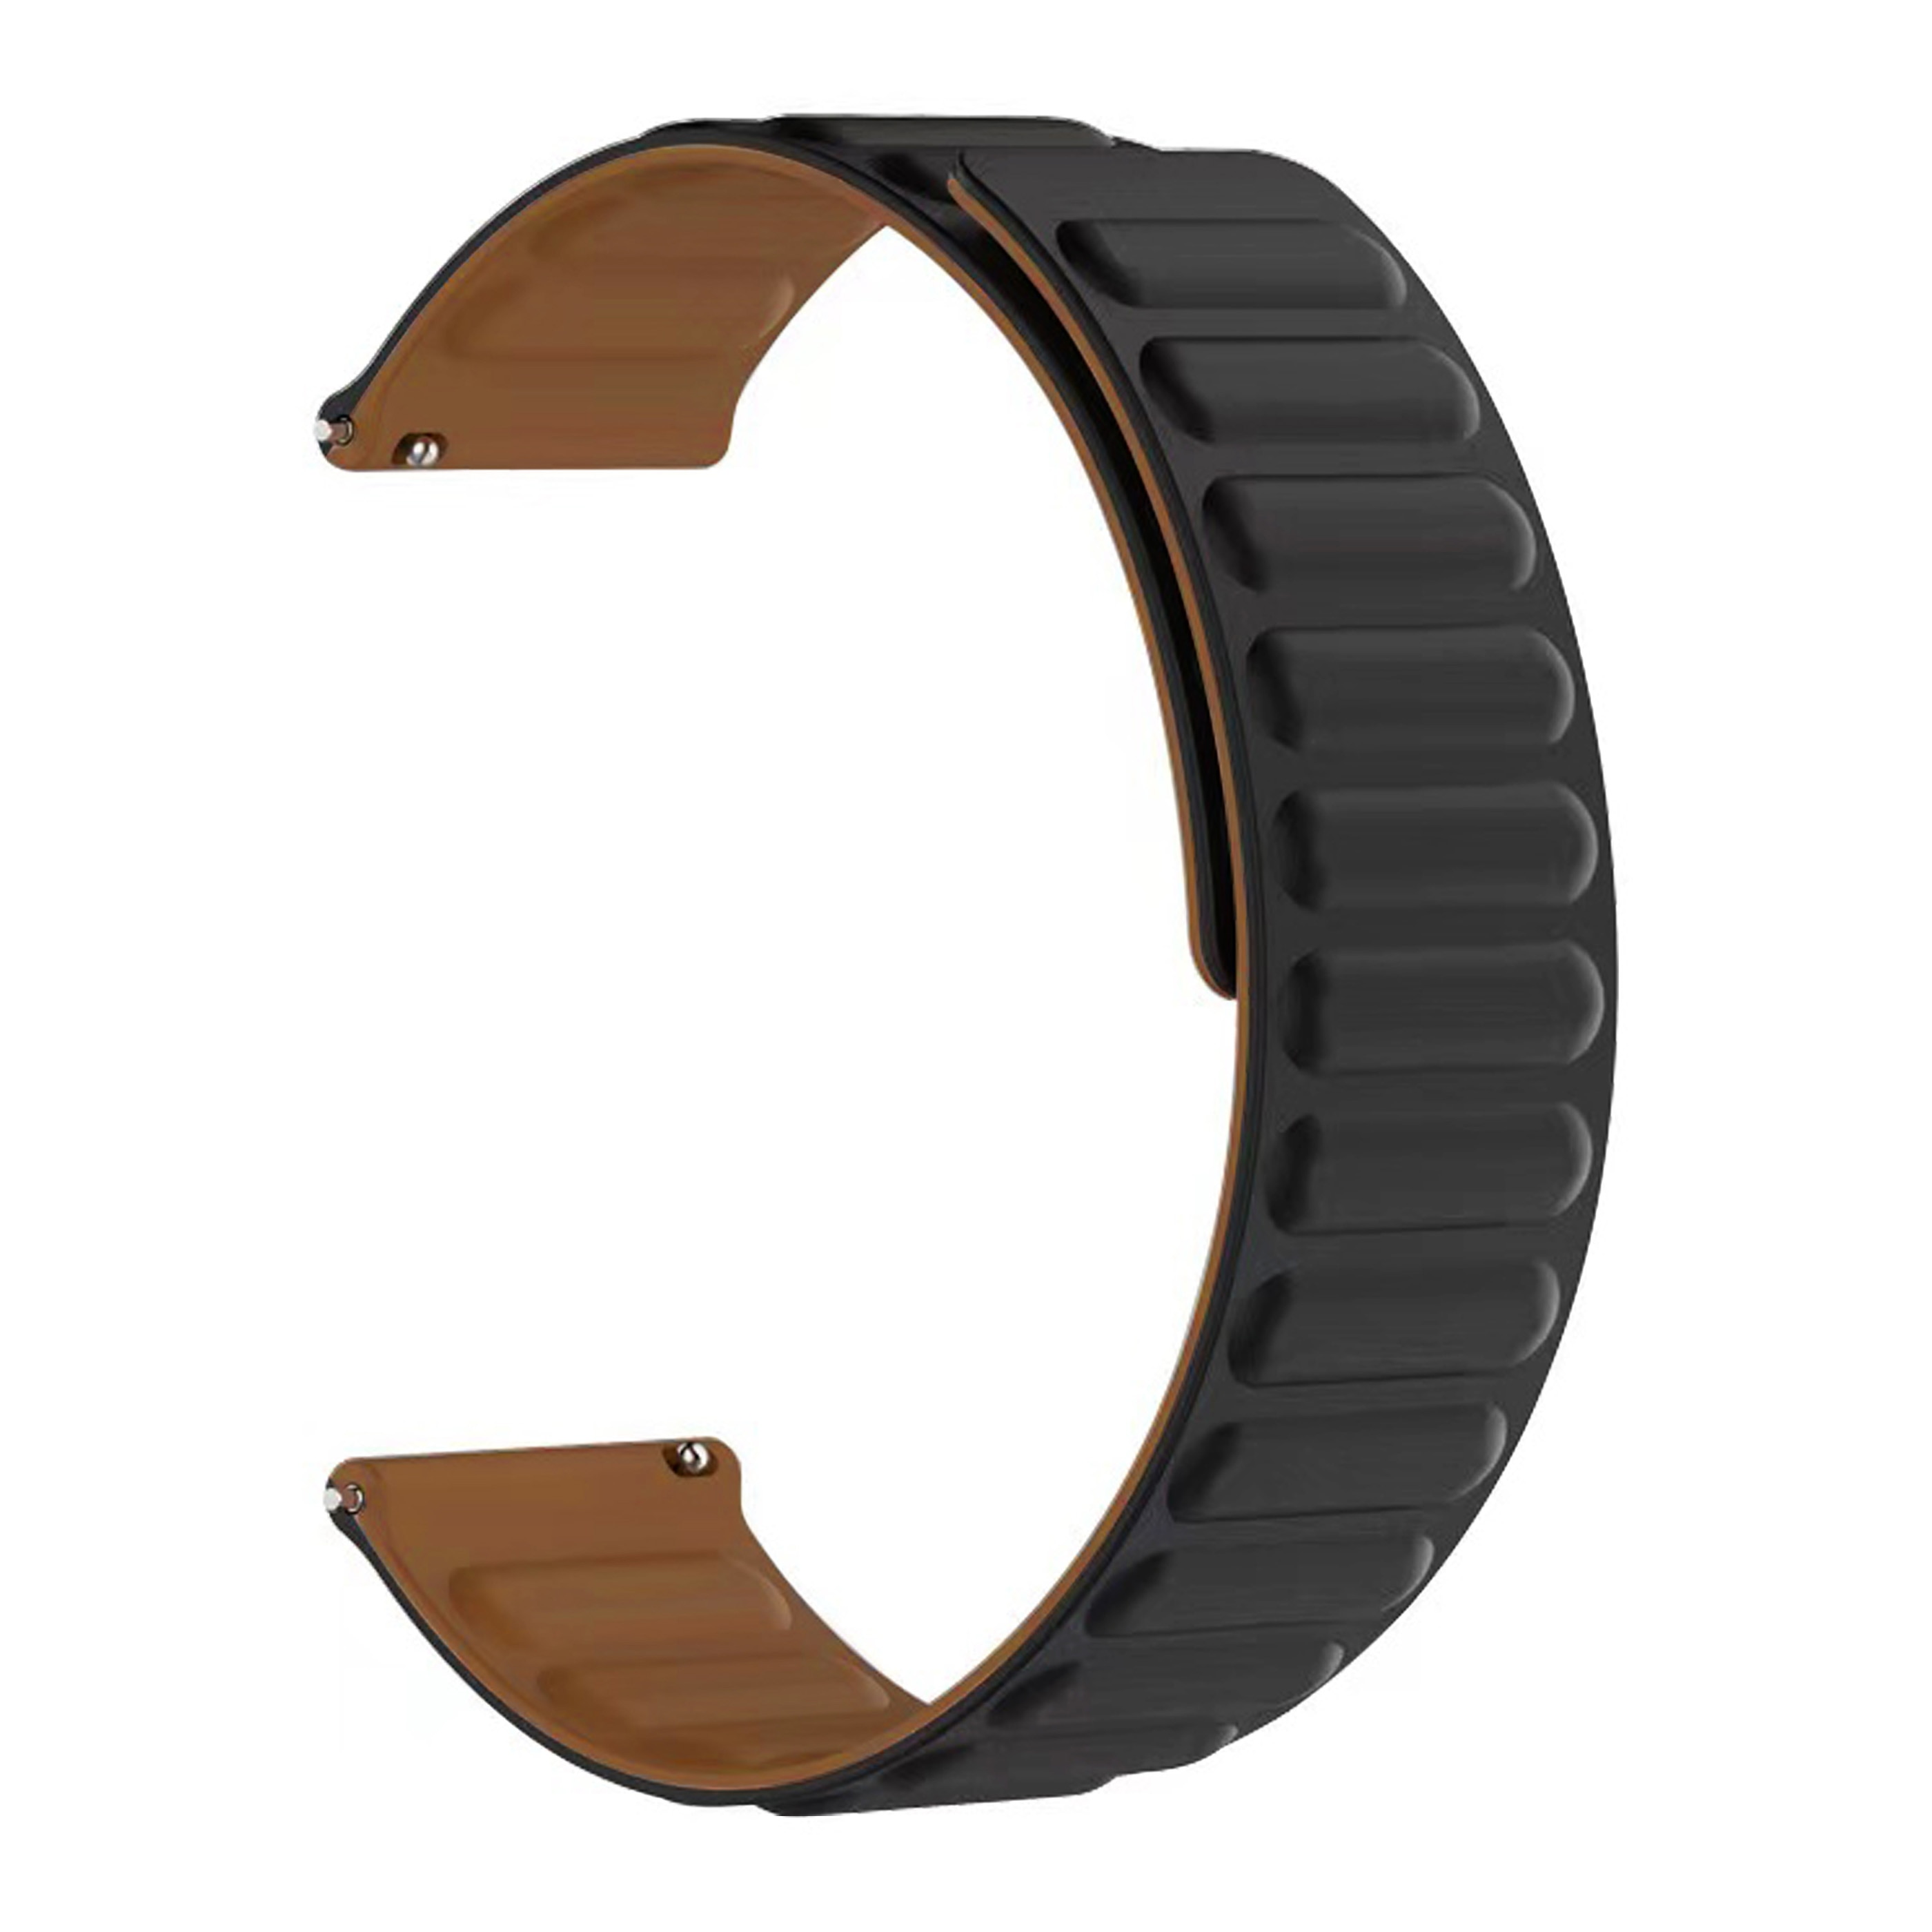 Hama Fit Watch 5910 Magnetic Silicone Band Black